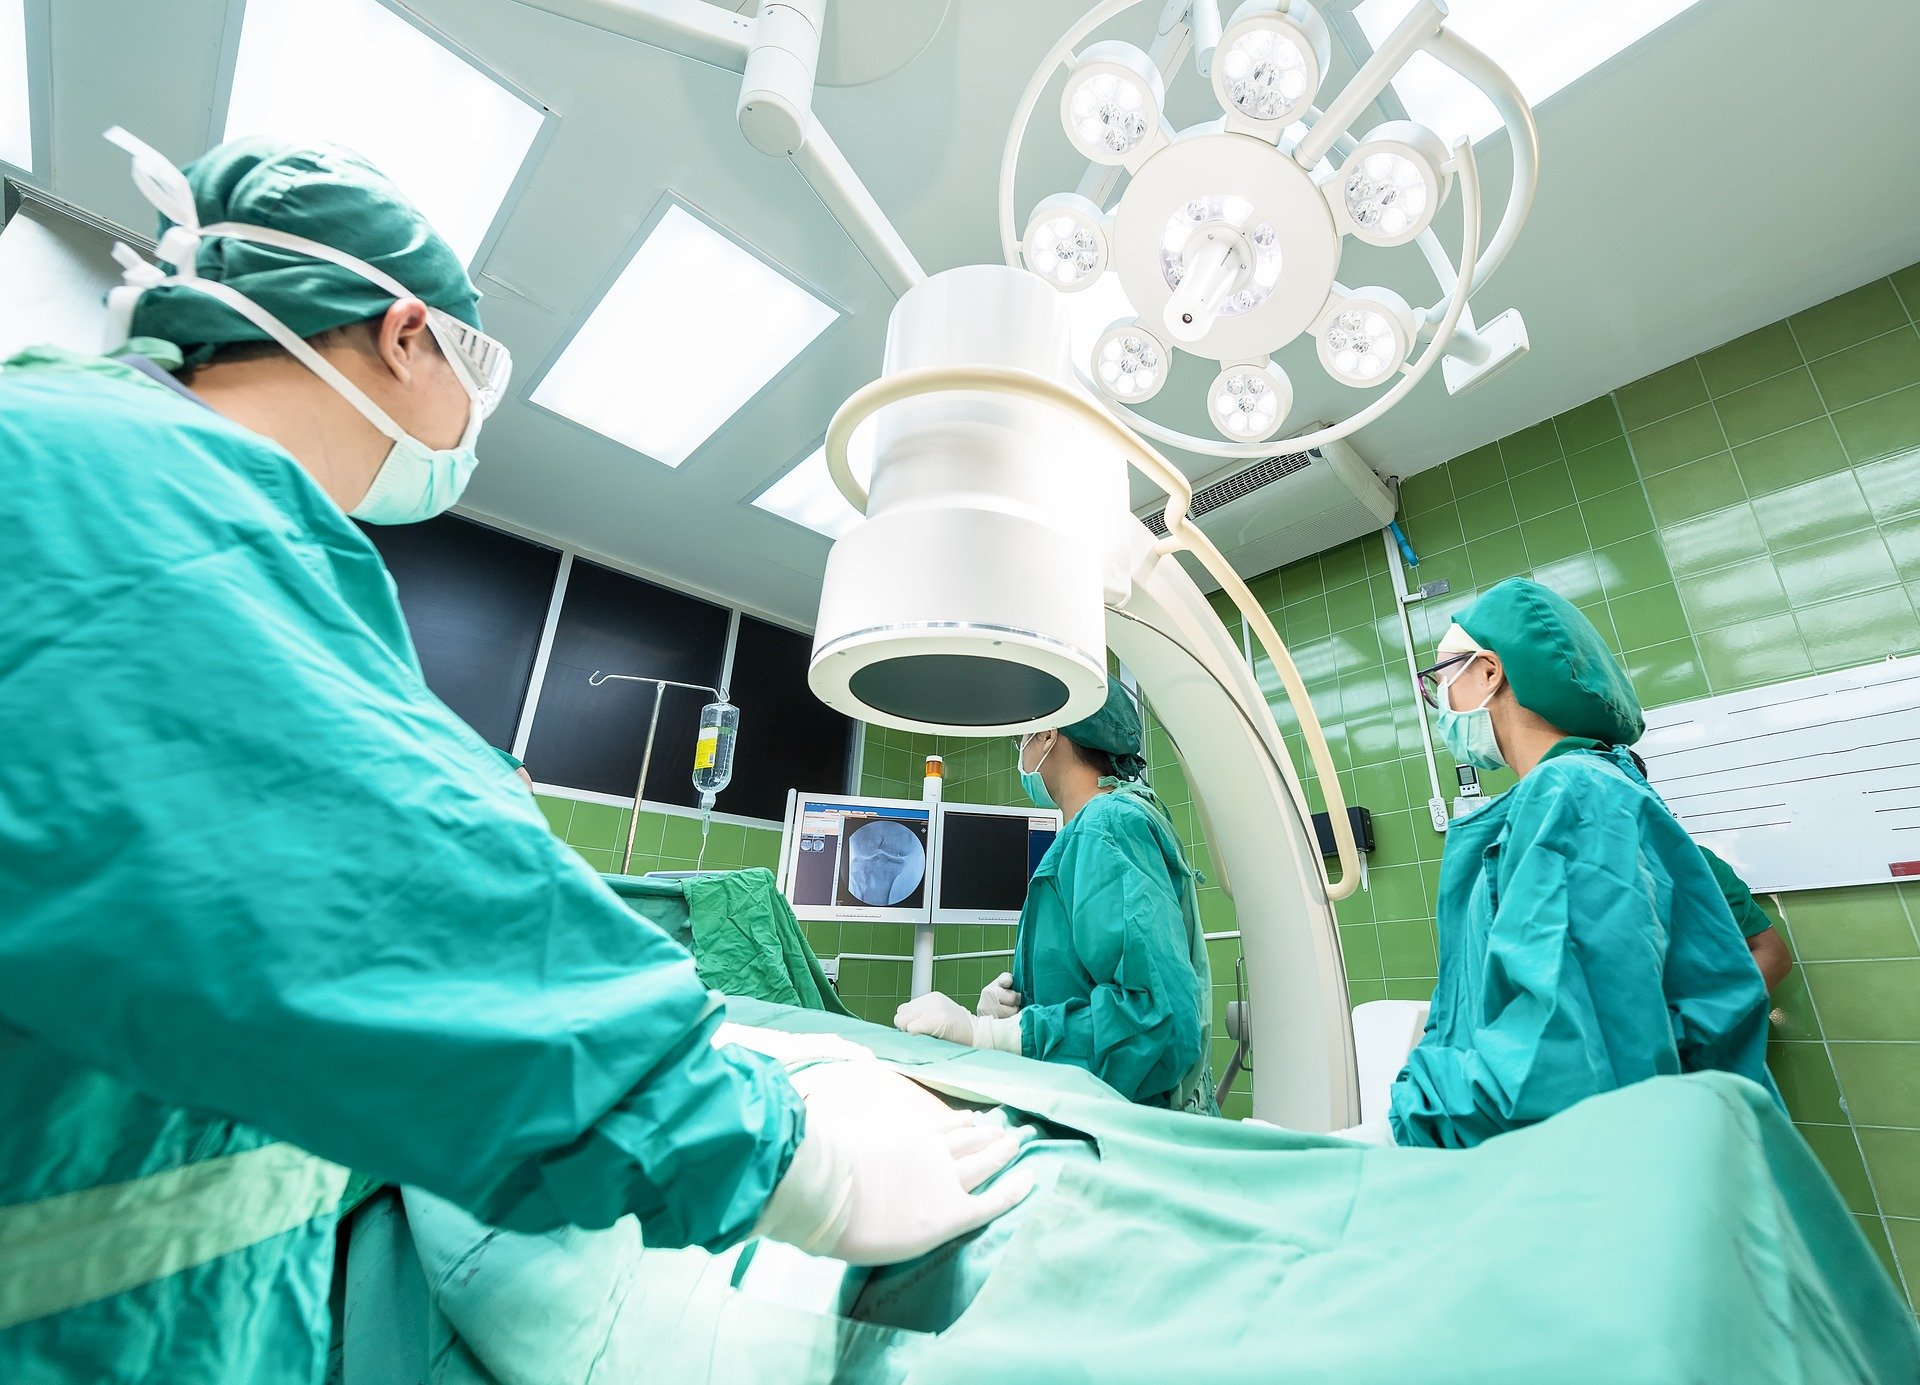 Doctors wearing scrub suit in an operating room